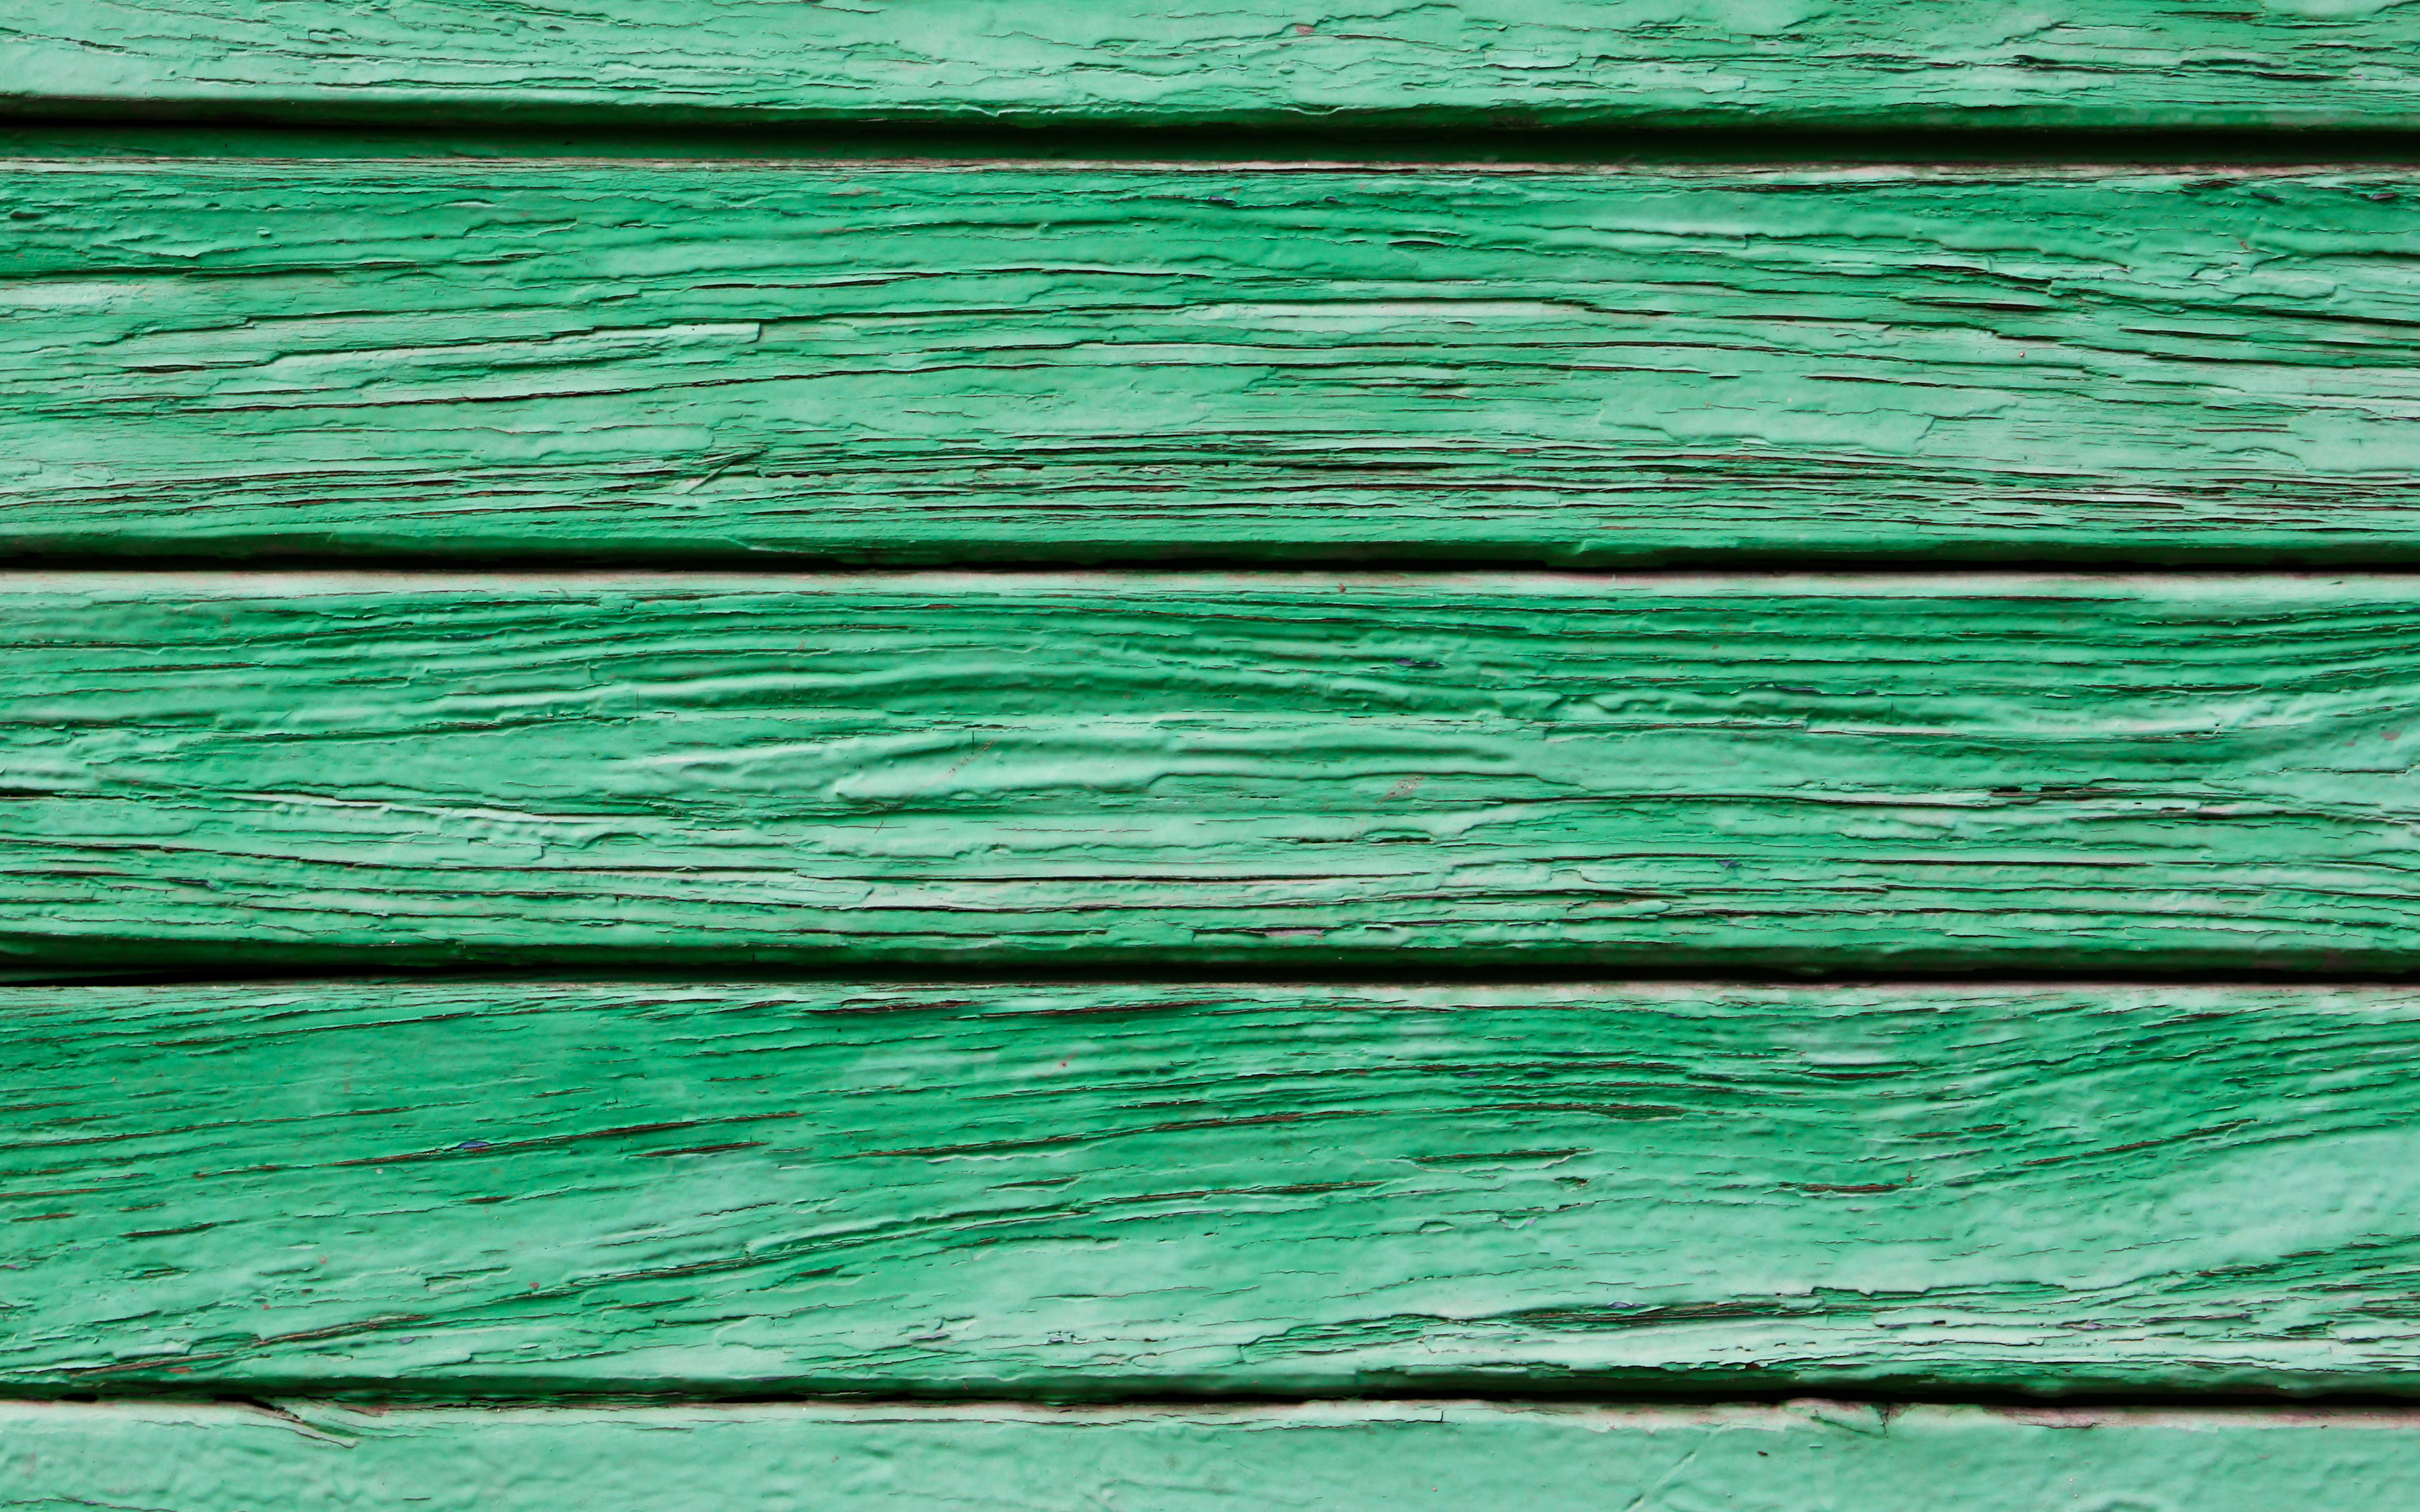 Download wallpaper green wooden boards, 4k, macro, horizontal wooden boards, green wooden texture, wooden lines, green wooden background, wooden textures, green background for desktop with resolution 3840x2400. High Quality HD picture wallpaper